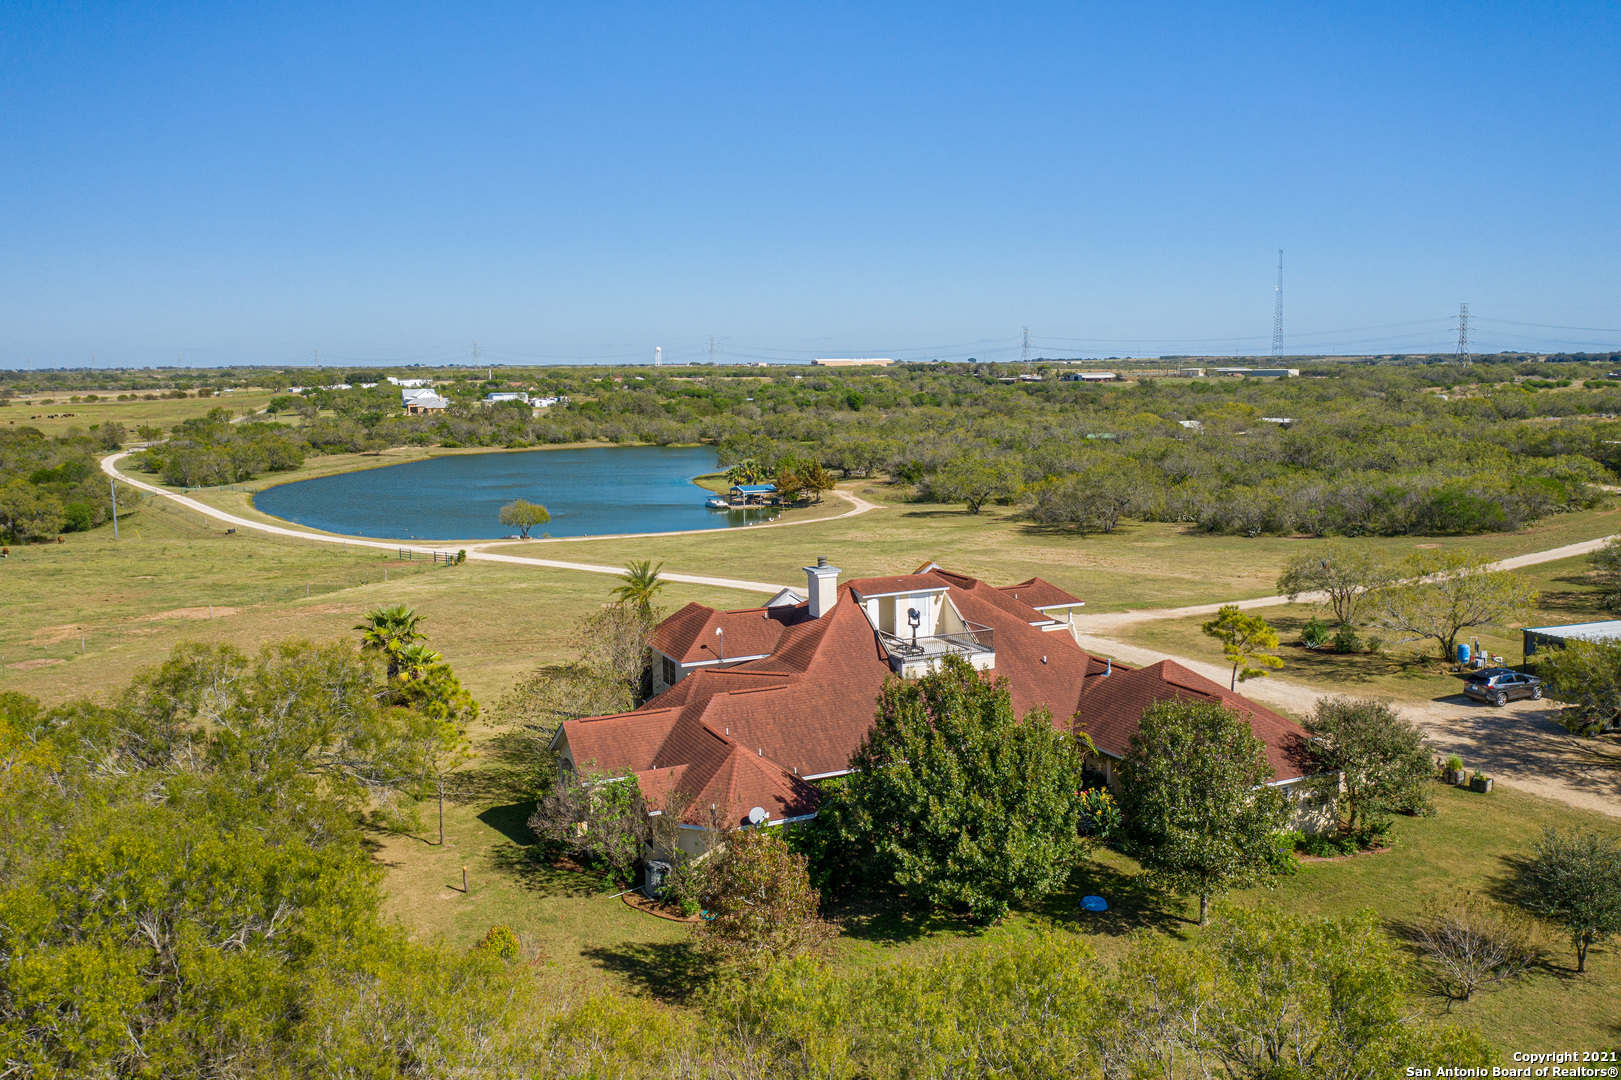 From the Starry Nights to the City Lights this one of a kind Texas Ranch is under 30 minutes to Downtown San Antonio & 1.5 hrs to Austin! 45.36 Ag Exempt unrestricted acres with a 5 acre fully stocked pond that you can wakeboard on, wild game to hunt, and pasture for grazing!   4,400 Square Ft Custom home that you have to see to appreciate, 3 Walkout terraces to see the magnificent Texas night sky, Custom Solar Farm to go off grid, and 3 custom wells dug throughout the property this place is truly a resort style setup with top quality weightroom, media room that you will not find anywhere for this price in the Central Texas corridor. Everything is bigger and better in Texas and it is clear to see why when you see this amazing Estate!